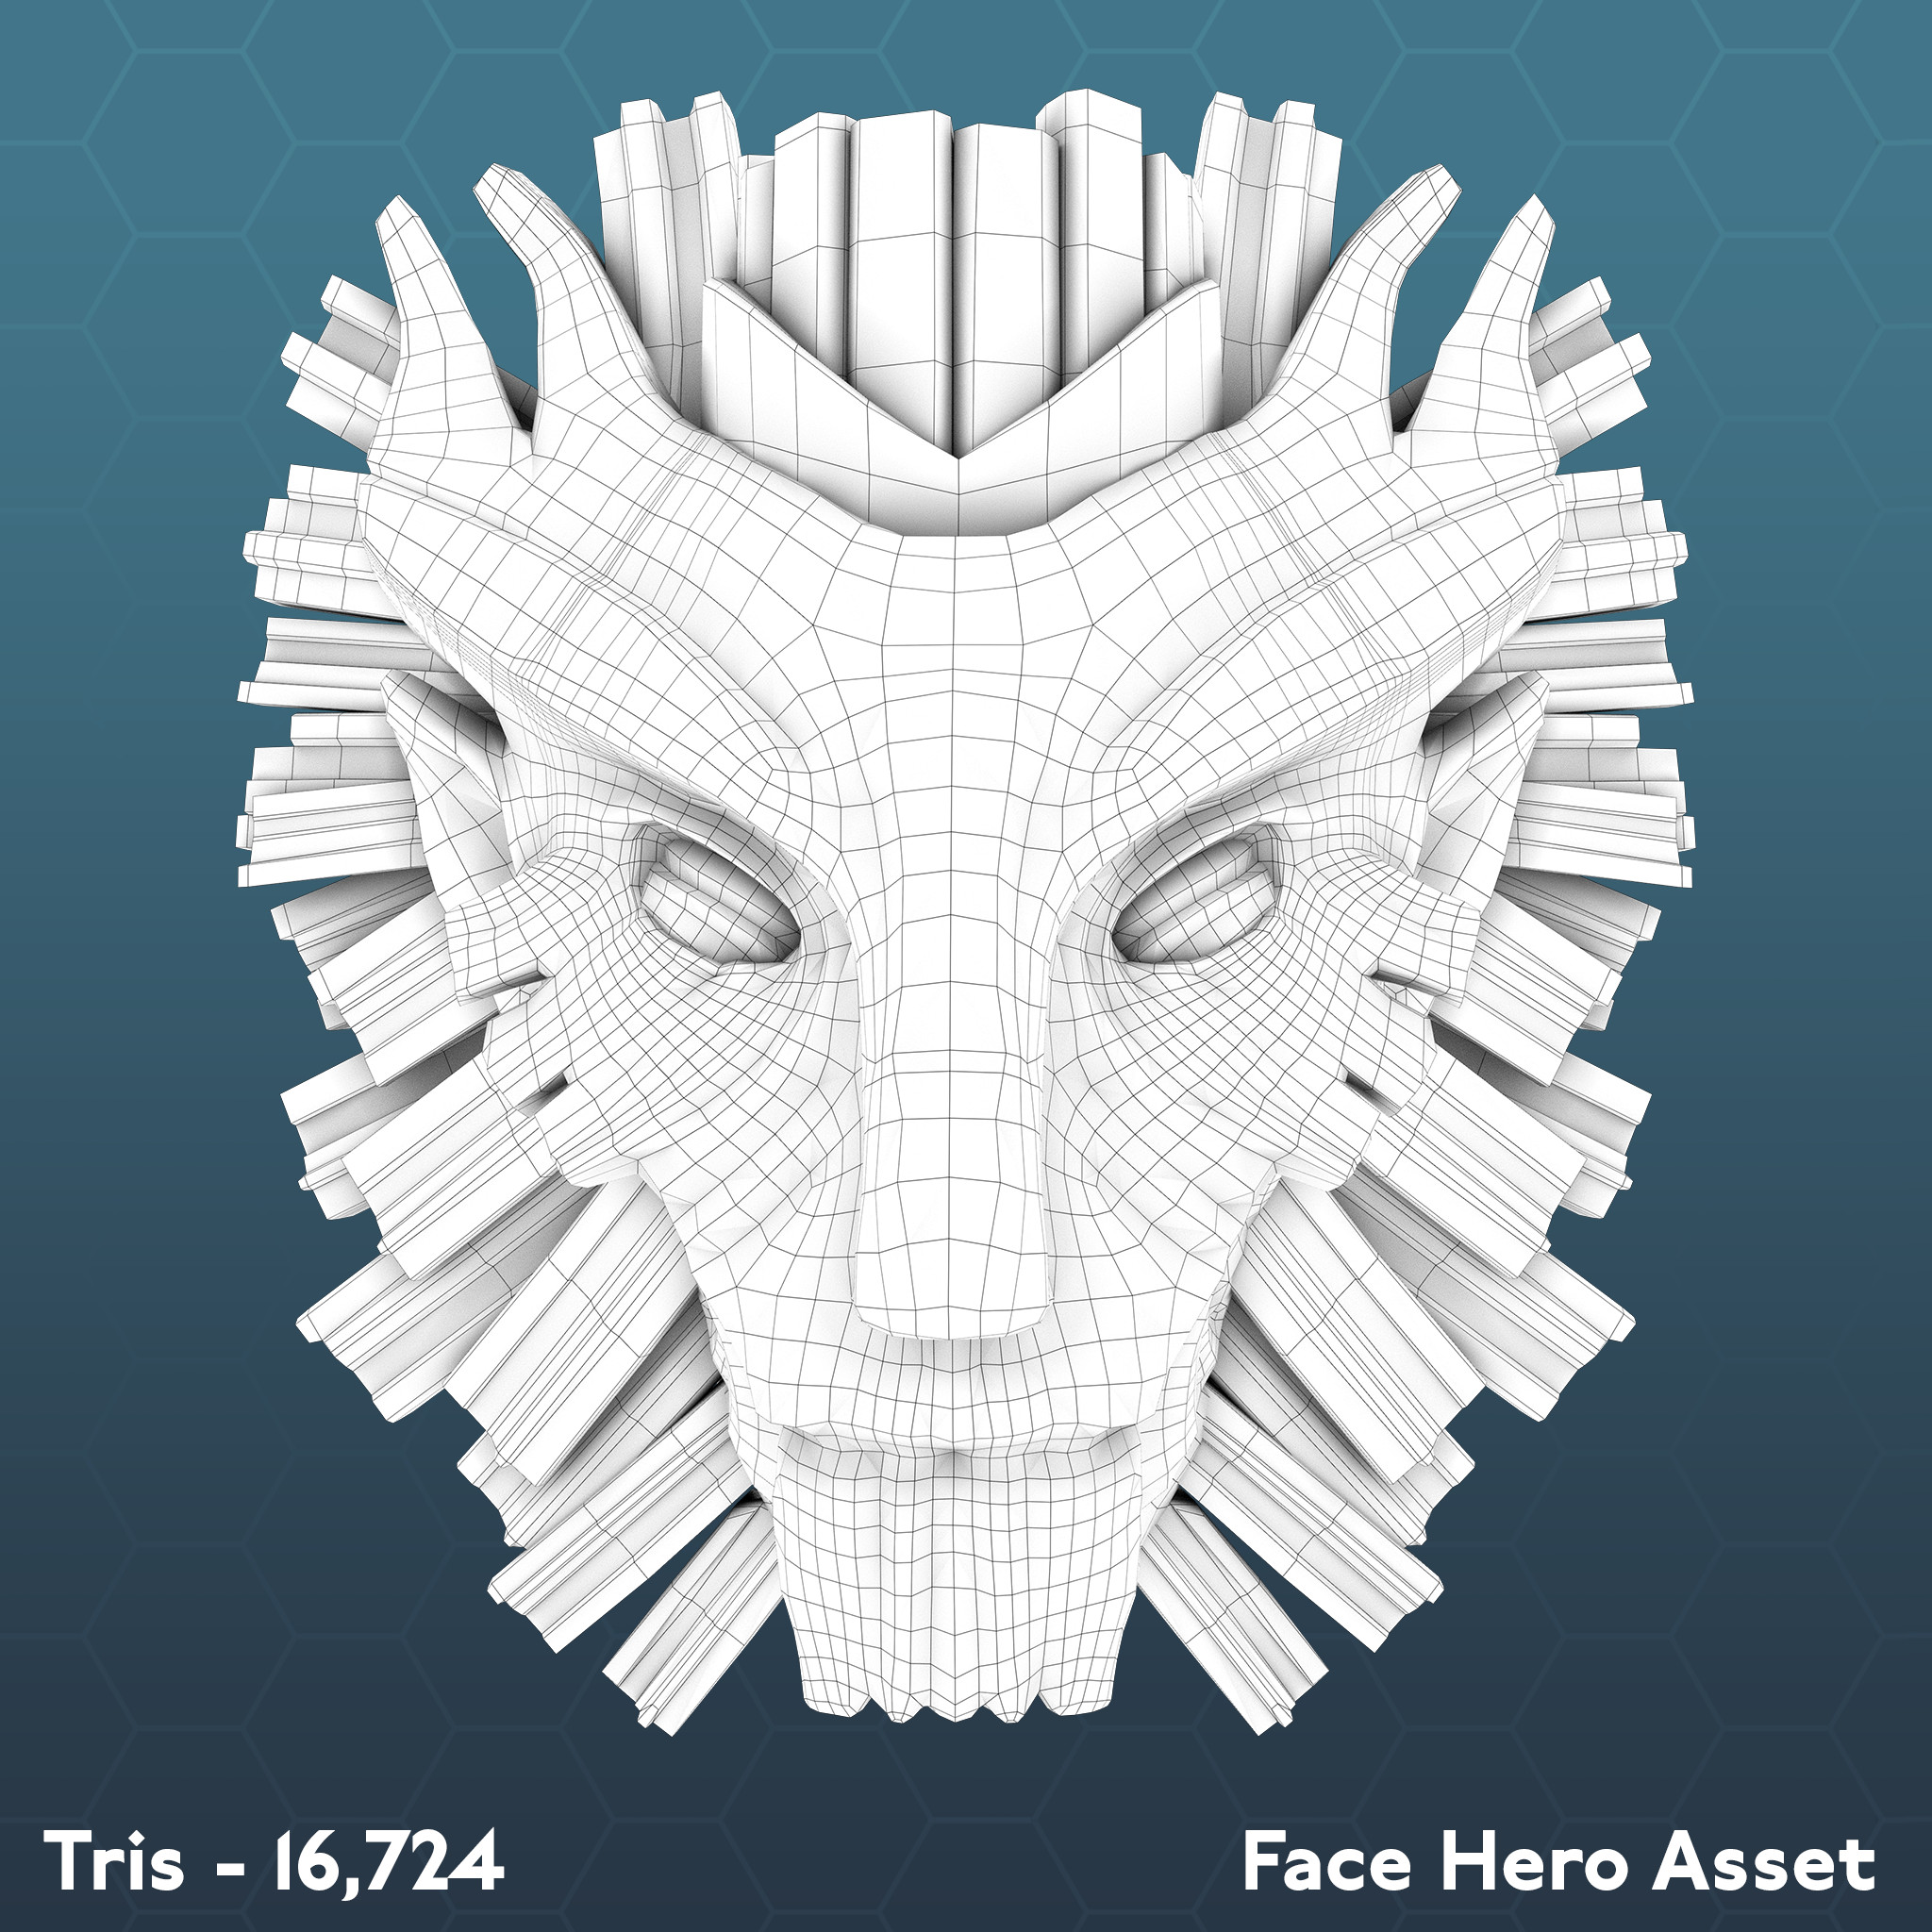 The face was one of my core environment models. We wanted to show the grandness and legacy of the beings who had made the temple, and thus decided a large stone face served the purpose well. 